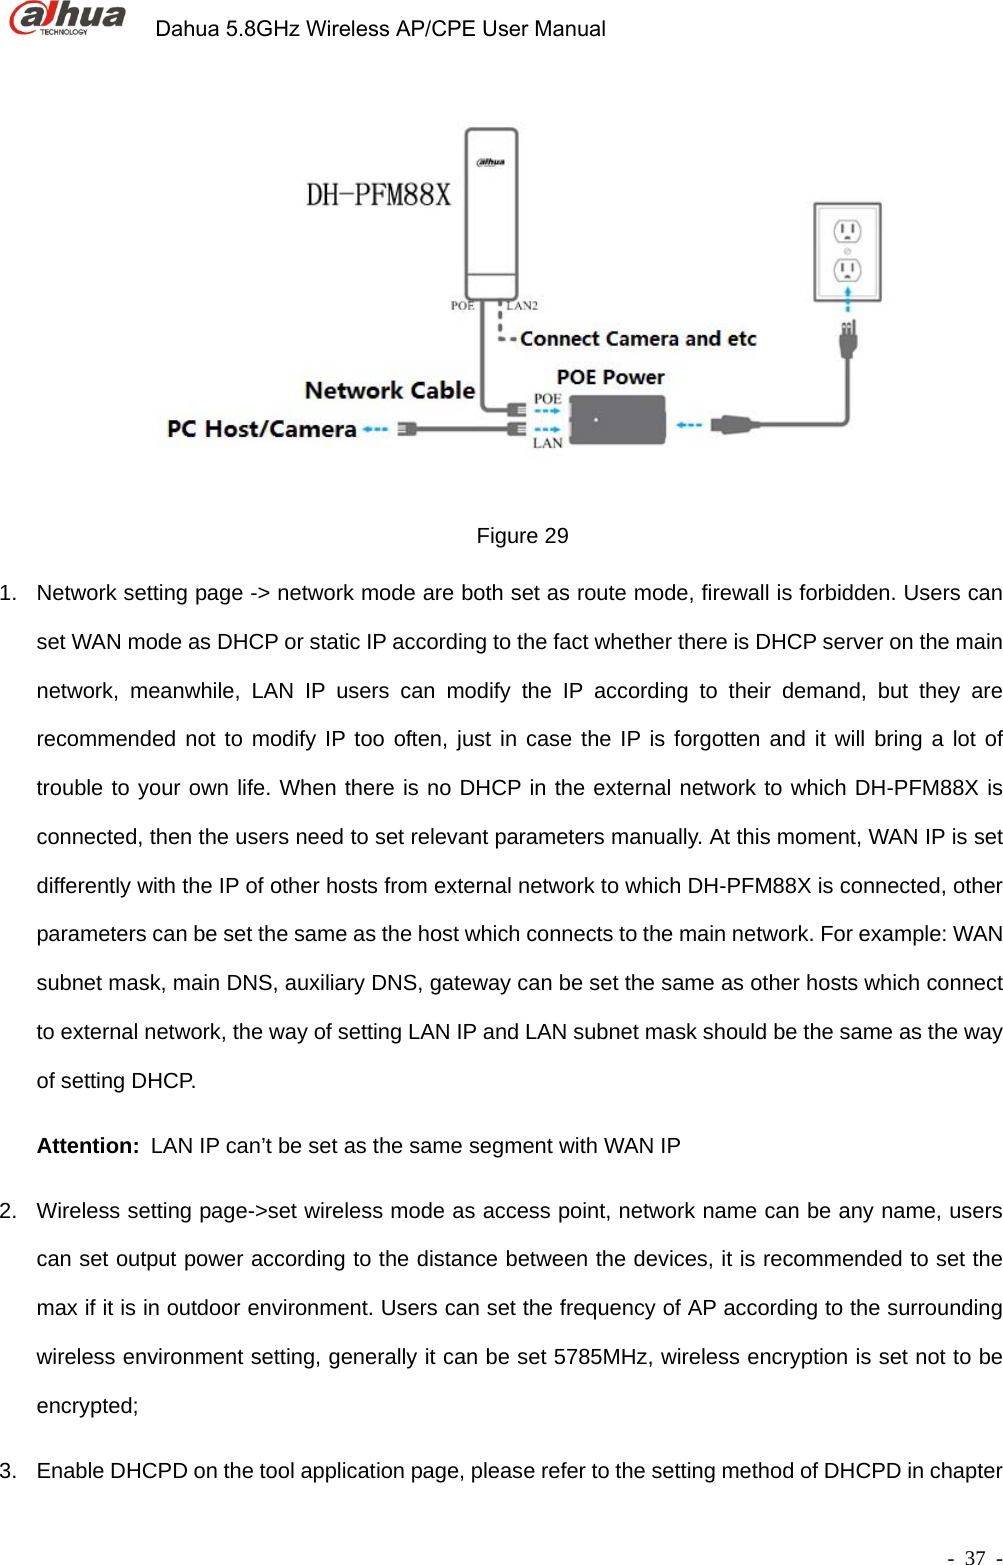             Dahua 5.8GHz Wireless AP/CPE User Manual        - 37 -  Figure 29 1.  Network setting page -&gt; network mode are both set as route mode, firewall is forbidden. Users can set WAN mode as DHCP or static IP according to the fact whether there is DHCP server on the main network, meanwhile, LAN IP users can modify the IP according to their demand, but they are recommended not to modify IP too often, just in case the IP is forgotten and it will bring a lot of trouble to your own life. When there is no DHCP in the external network to which DH-PFM88X is connected, then the users need to set relevant parameters manually. At this moment, WAN IP is set differently with the IP of other hosts from external network to which DH-PFM88X is connected, other parameters can be set the same as the host which connects to the main network. For example: WAN subnet mask, main DNS, auxiliary DNS, gateway can be set the same as other hosts which connect to external network, the way of setting LAN IP and LAN subnet mask should be the same as the way of setting DHCP. Attention: LAN IP can’t be set as the same segment with WAN IP 2.  Wireless setting page-&gt;set wireless mode as access point, network name can be any name, users can set output power according to the distance between the devices, it is recommended to set the max if it is in outdoor environment. Users can set the frequency of AP according to the surrounding wireless environment setting, generally it can be set 5785MHz, wireless encryption is set not to be encrypted; 3.  Enable DHCPD on the tool application page, please refer to the setting method of DHCPD in chapter 